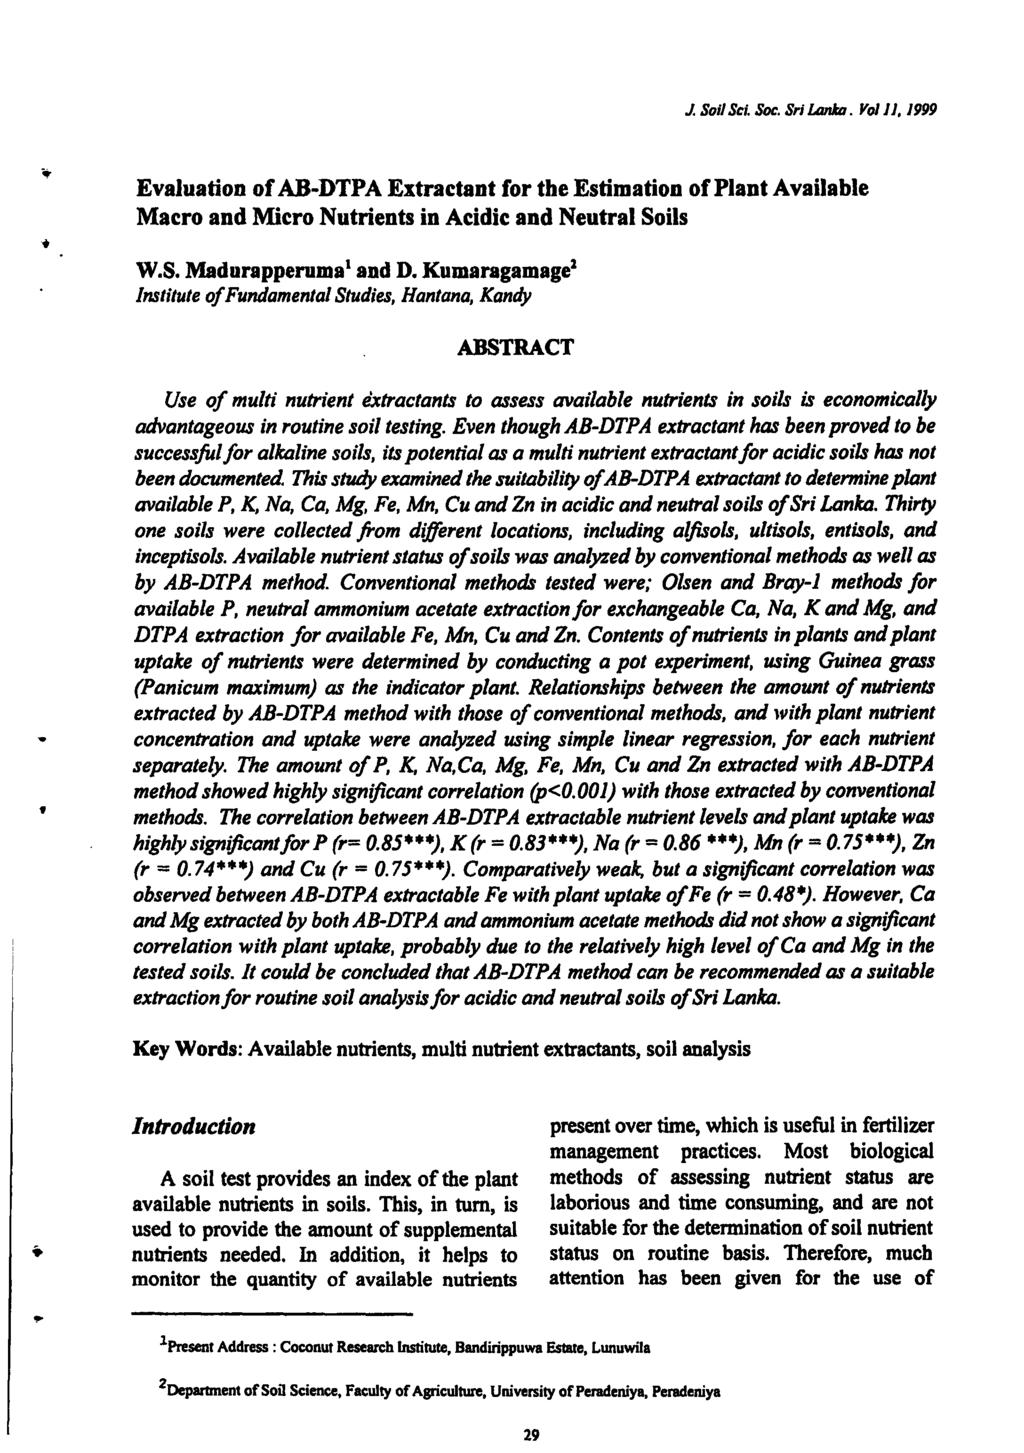 J. Soil Set Soc. Sri Lanka. Vol 11.1999 Evaluation of AB-DTPA Extractant for the Estimation of Plant Available Macro and Micro Nutrients in Acidic and Neutral Soils W.S. Madurapperuma 1 and D.